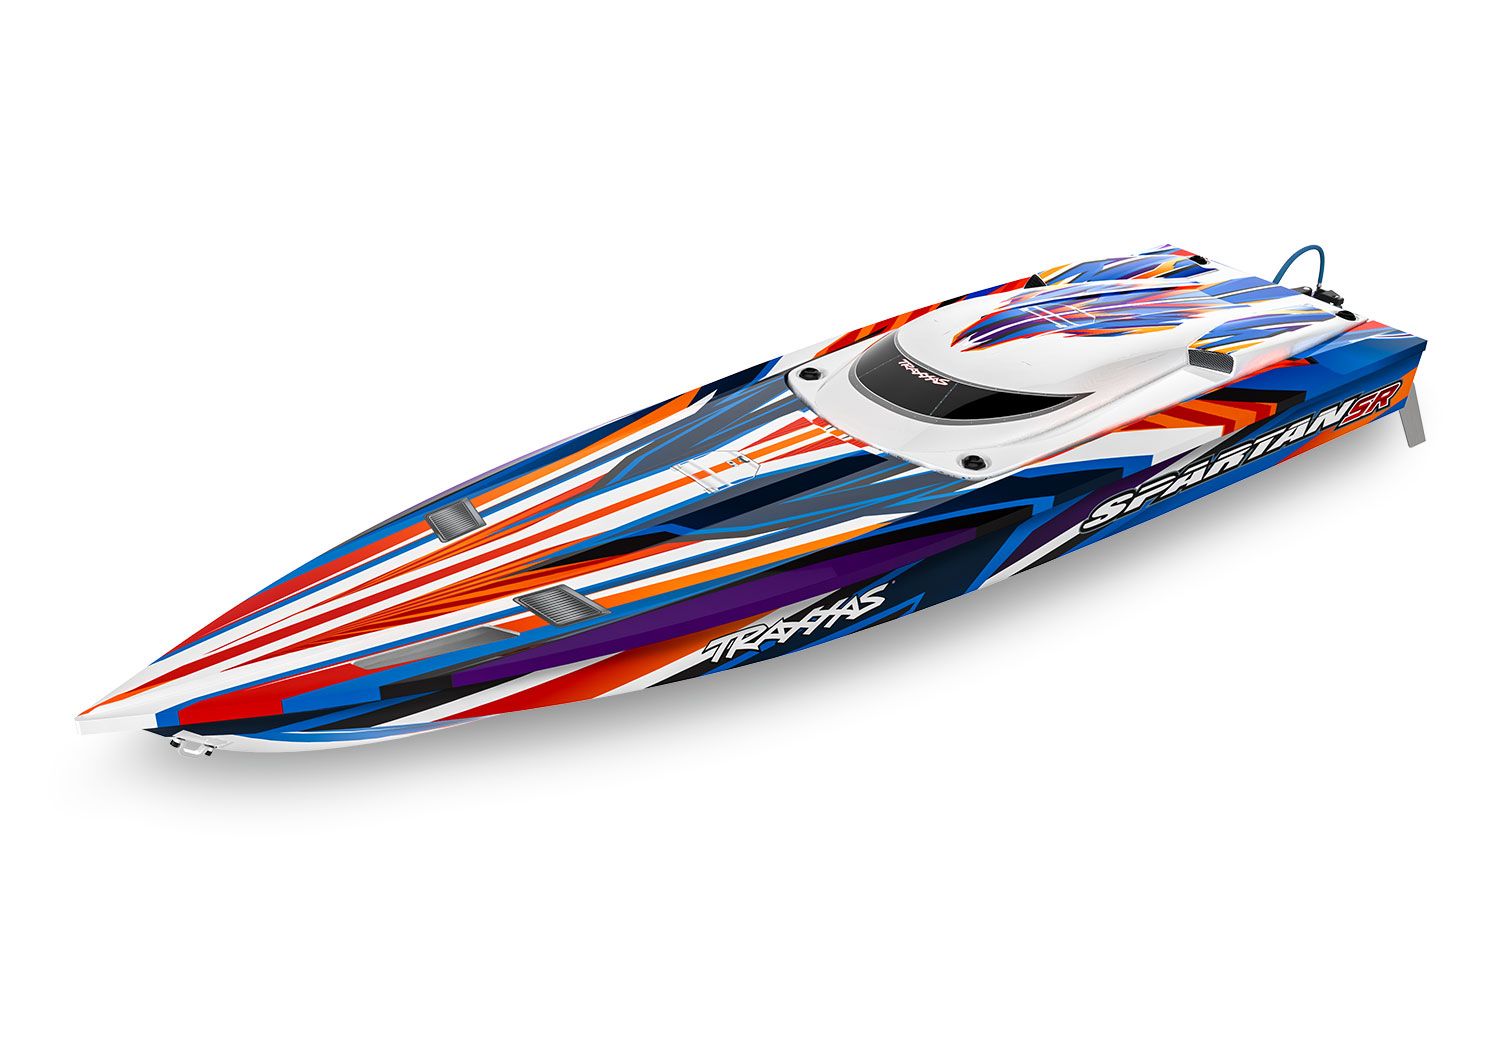 TRAXXAS 103076-4 Spartan SR: brushless race boat with self righting, TQi™ 2.4 GHz radio system, Traxxas Stability Management®, Velineon® 540XL Brushless Motor, VXL-6s Marine ESC, and factory-applied graphics.